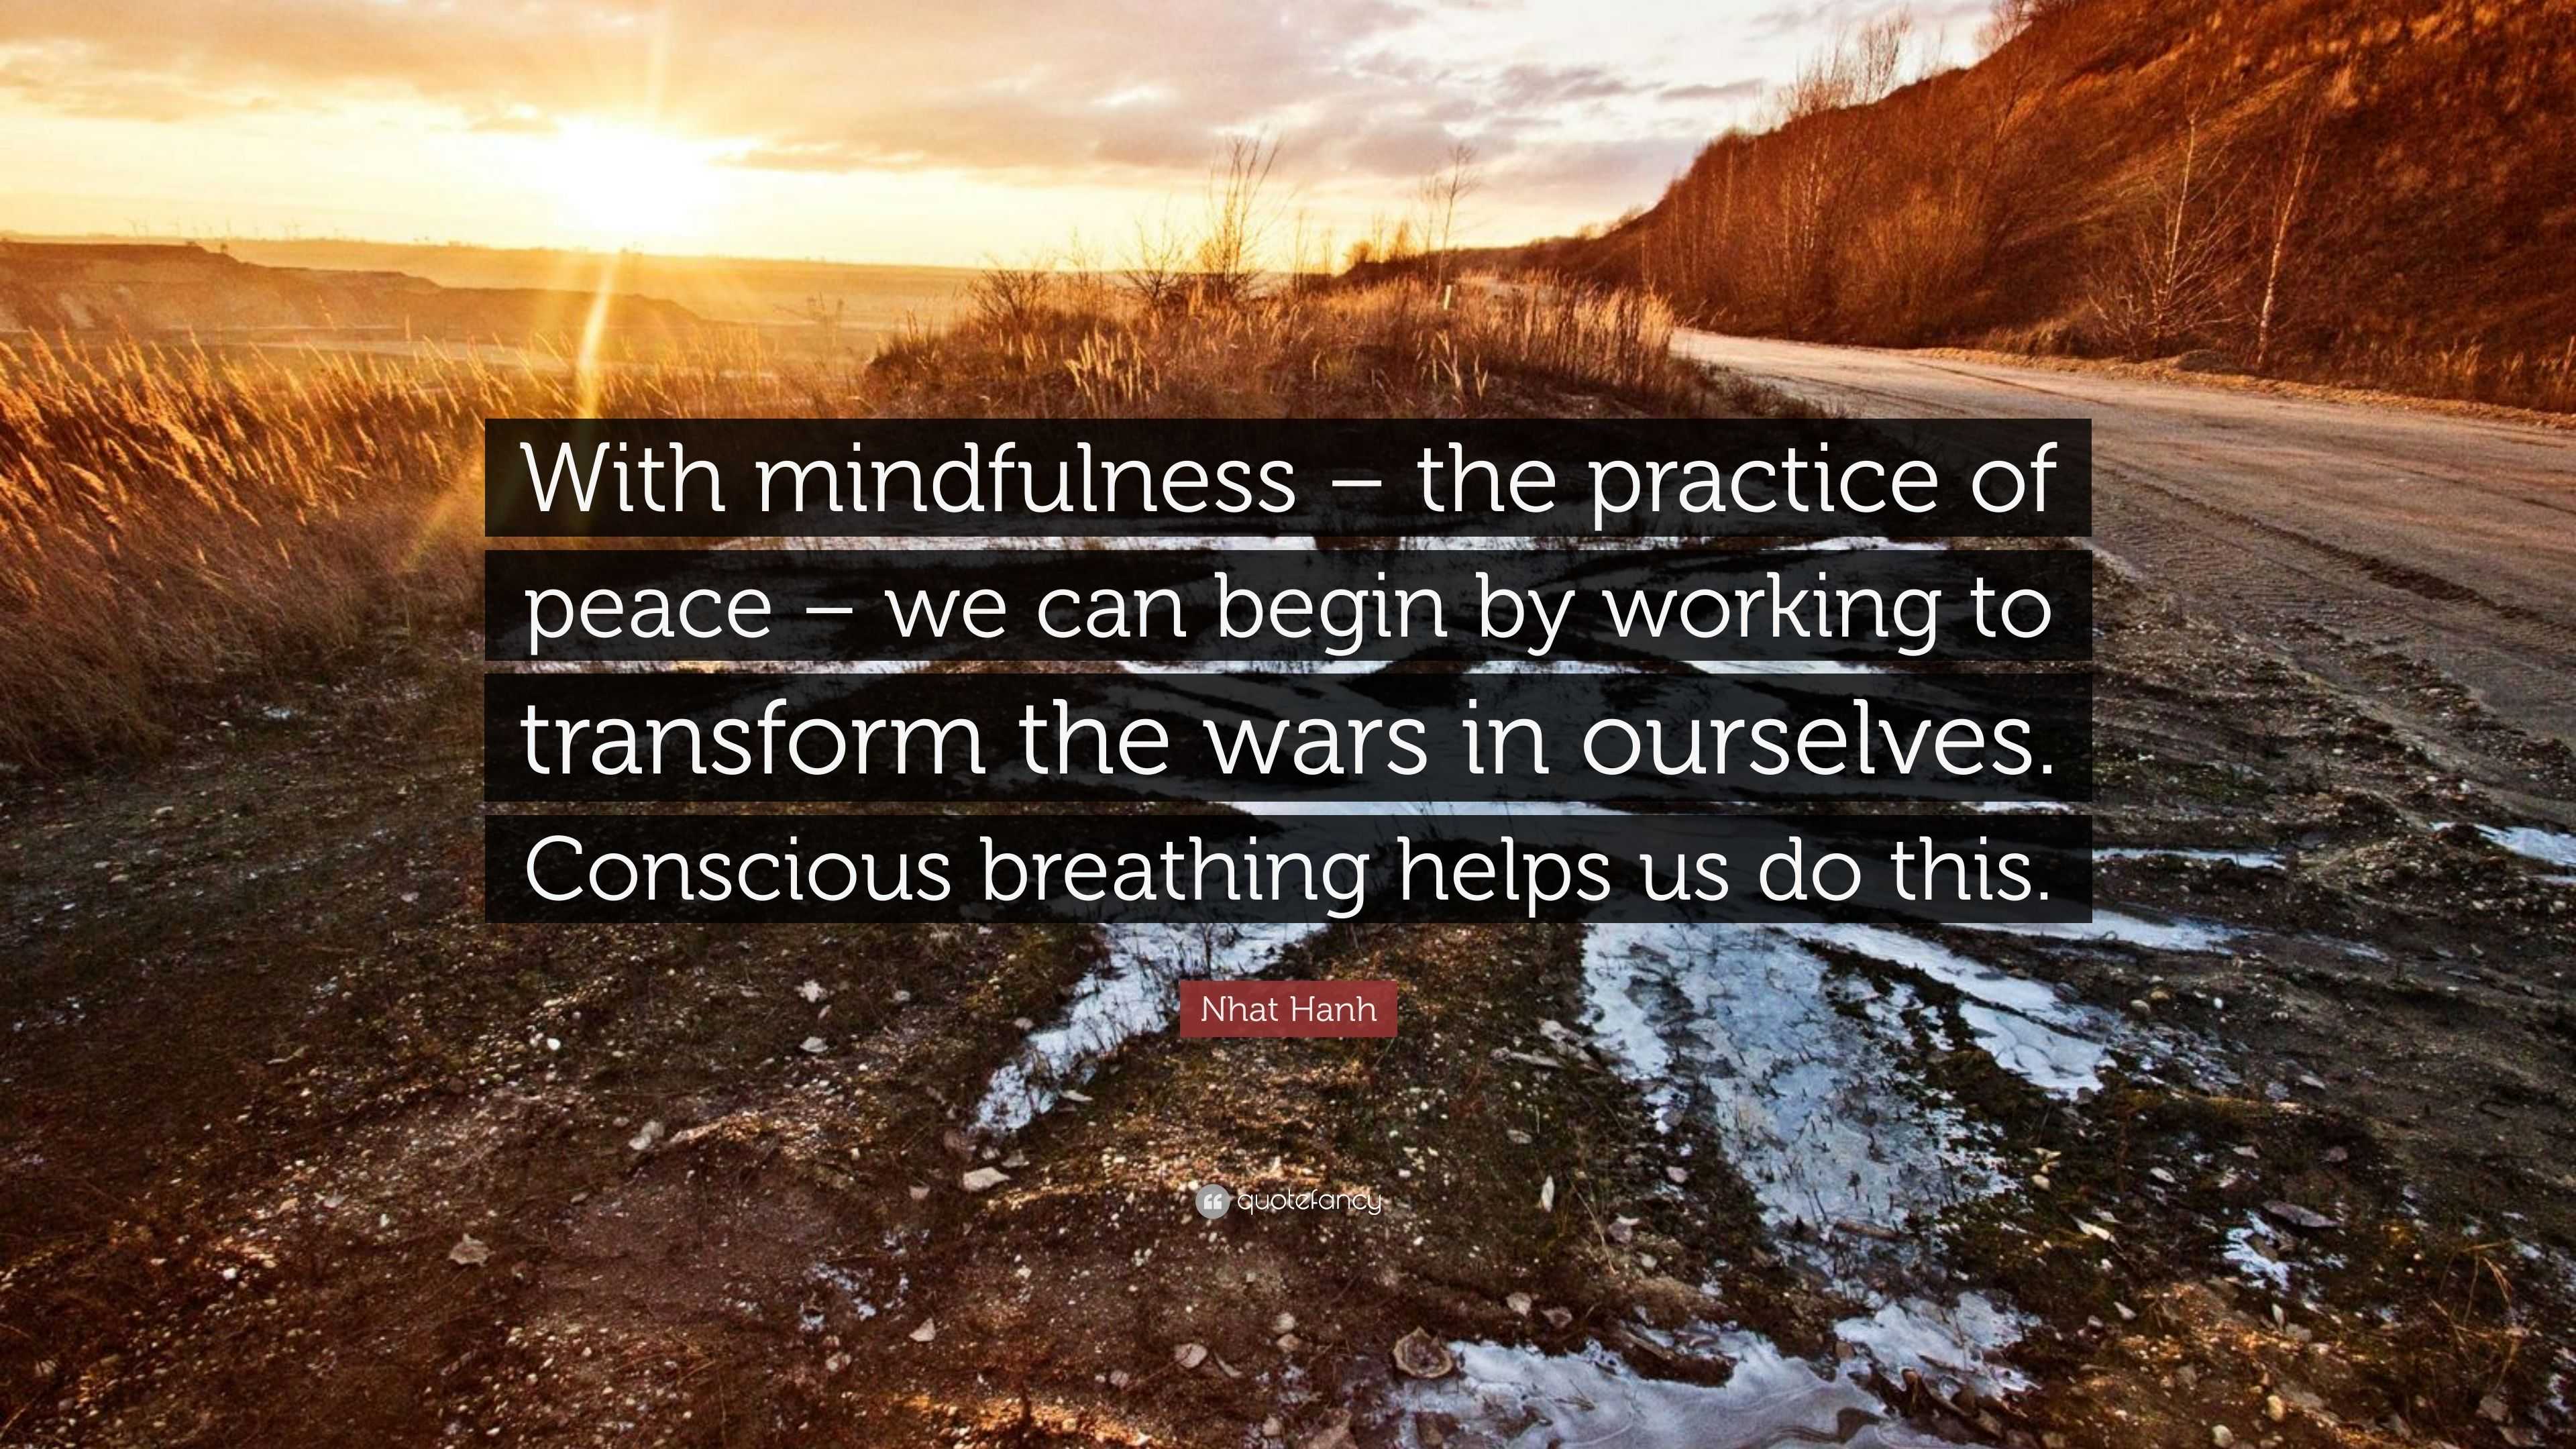 Nhat Hanh Quote “With mindfulness – the practice of peace – we can begin